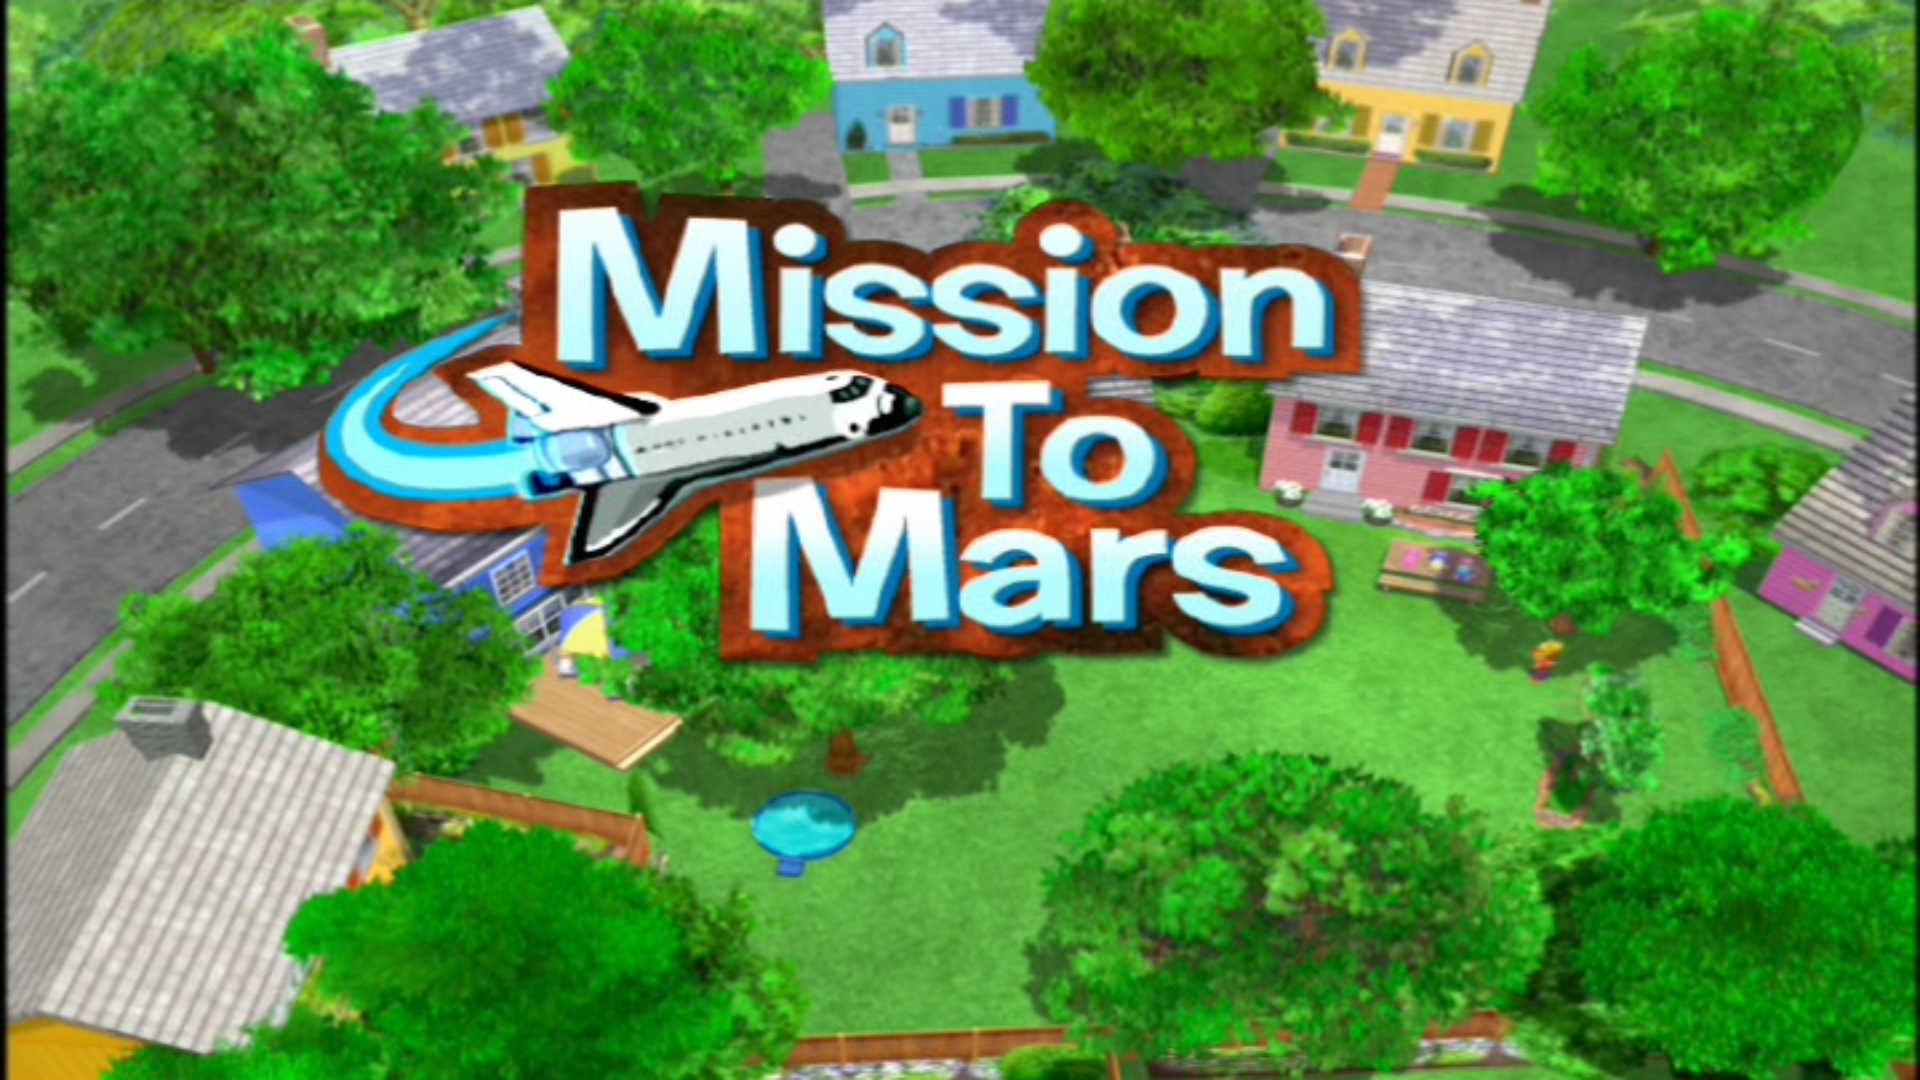 The backyardigans mission to mars dvd